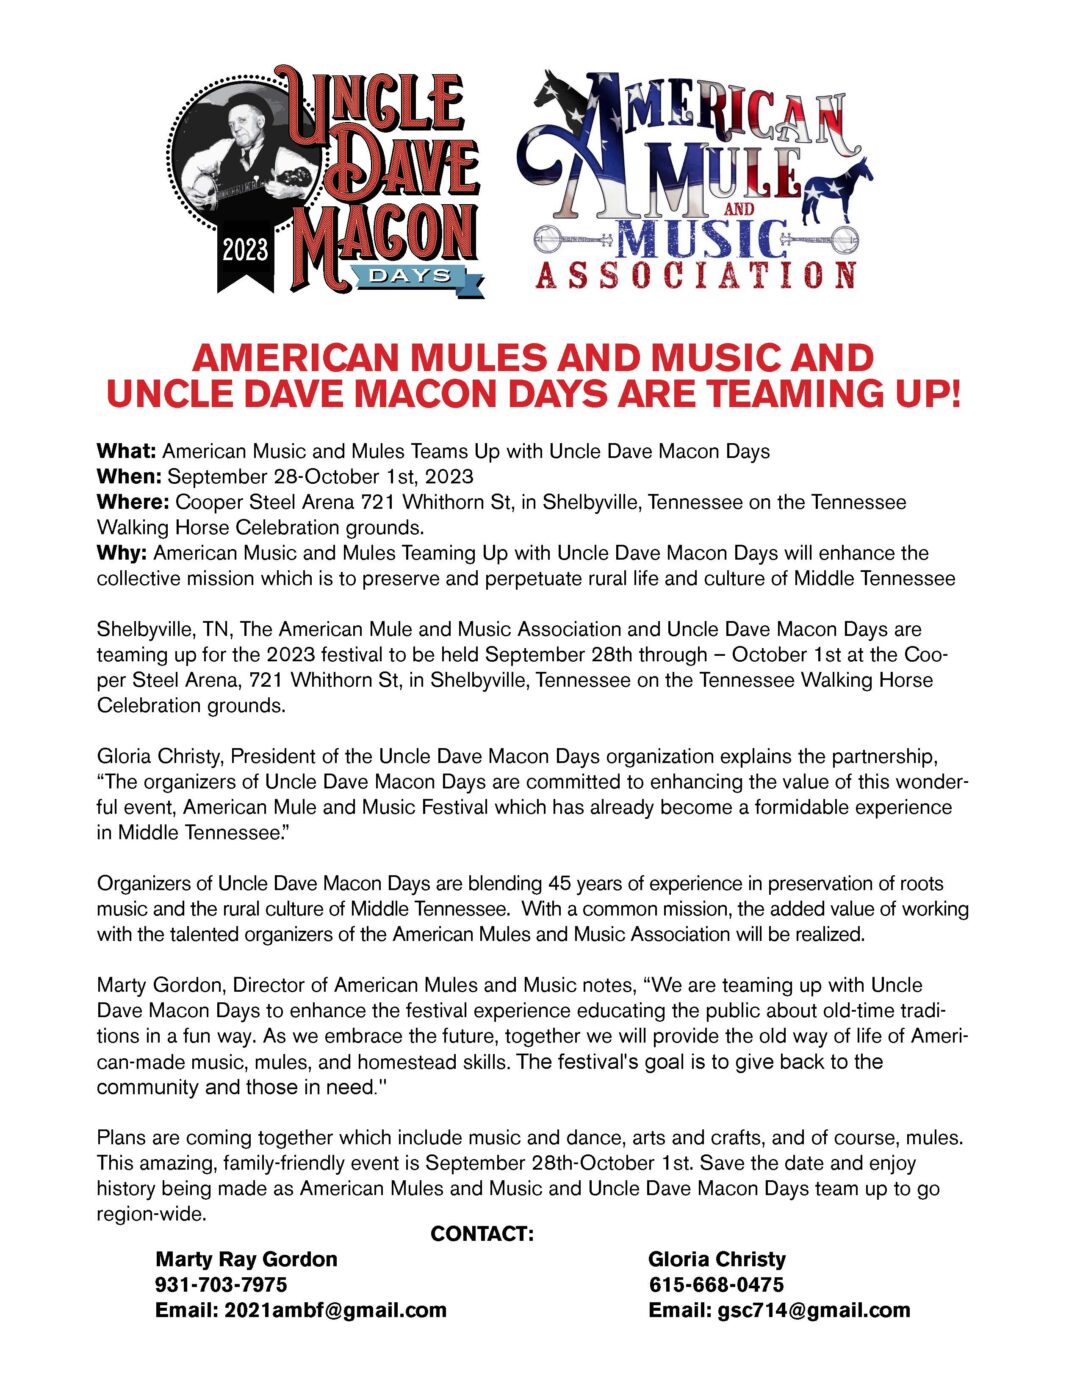 Uncle Dave Macon Days & American Mule & Music Festival The Celebration®